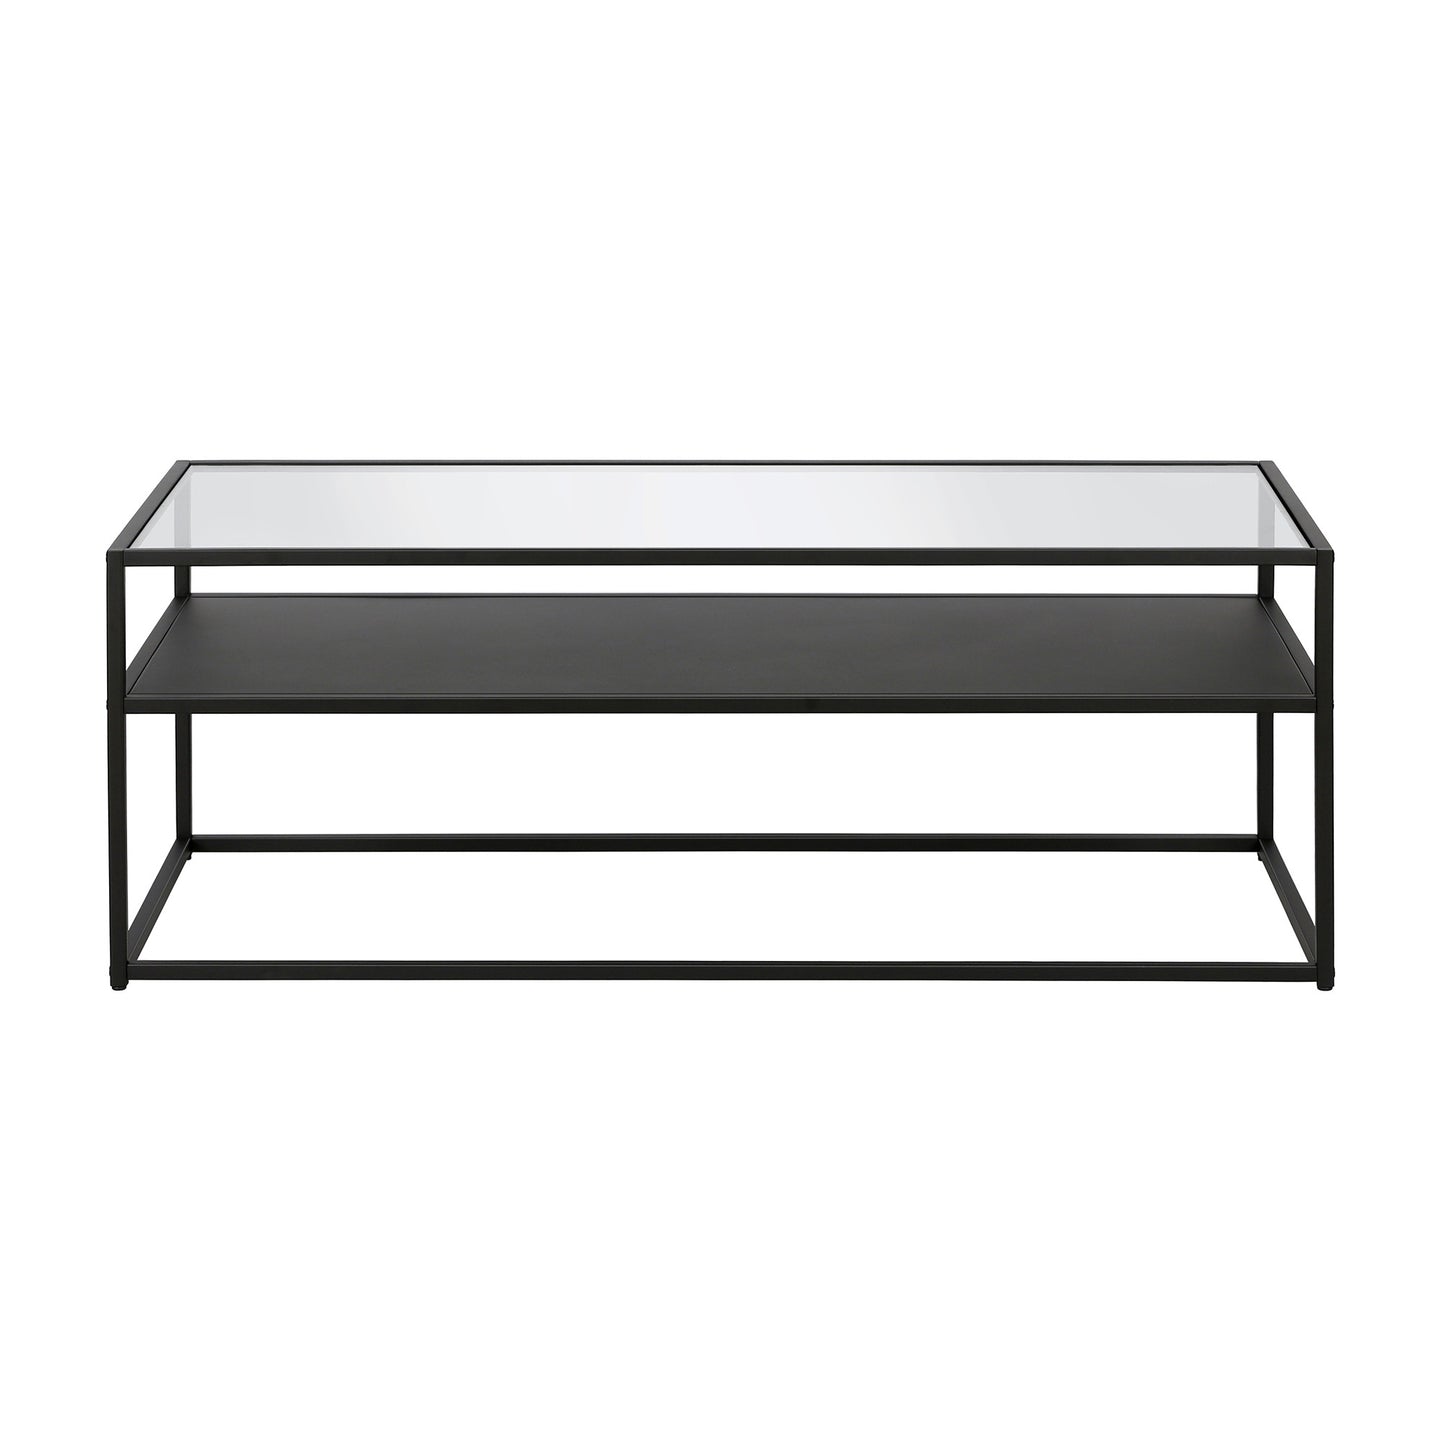 46" Black Glass And Steel Coffee Table With Shelf